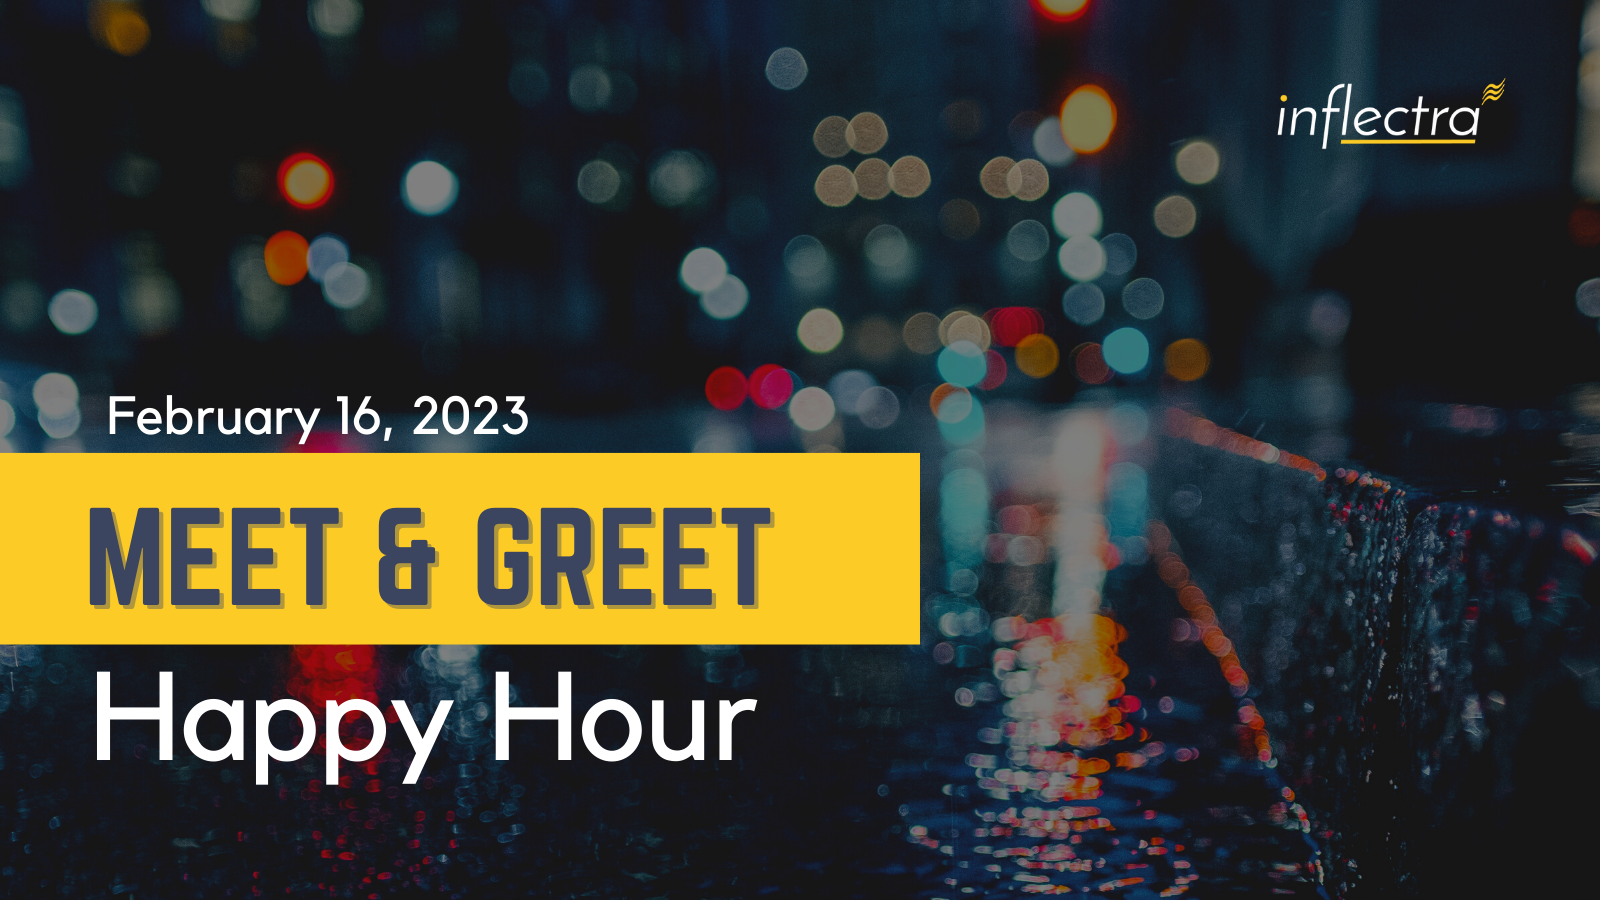 Happy Hour Meet & Greet by Inflectra - Meetup Invite Image